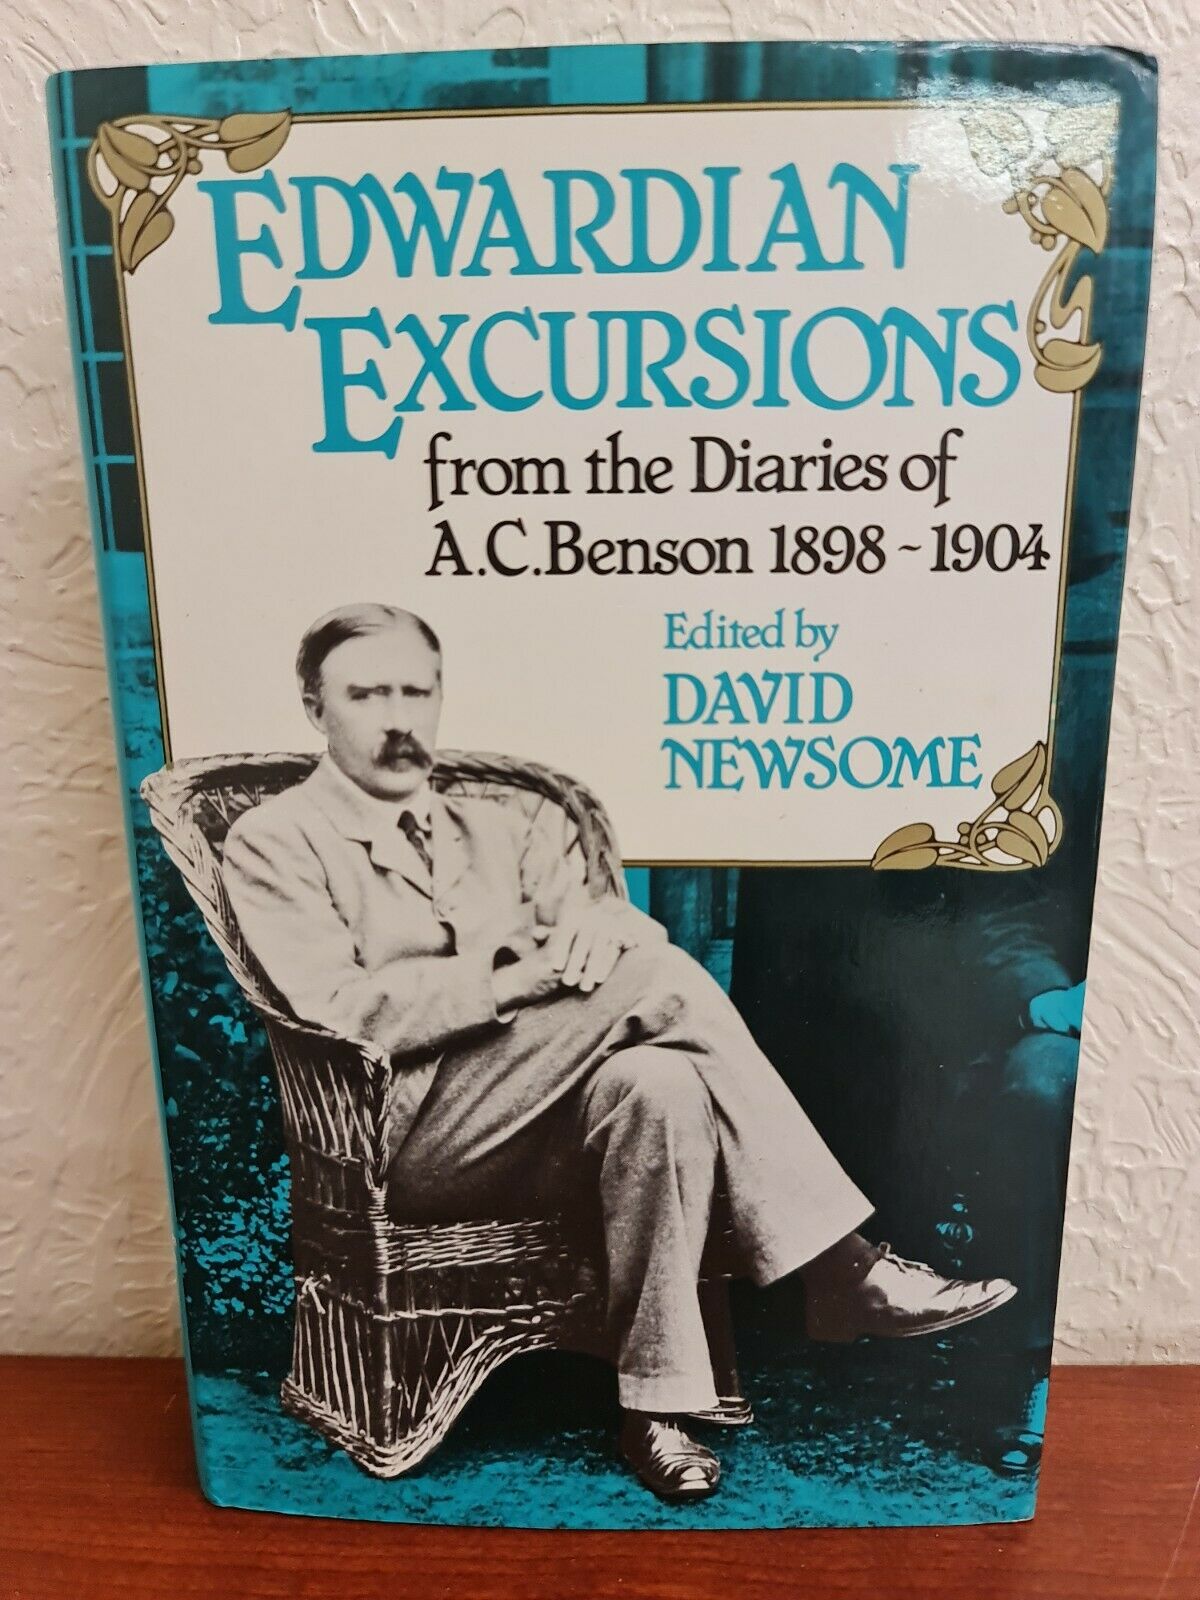 SIGNED - Edwardian Excursions: From the Diaries of AC Benson, 1898-1904